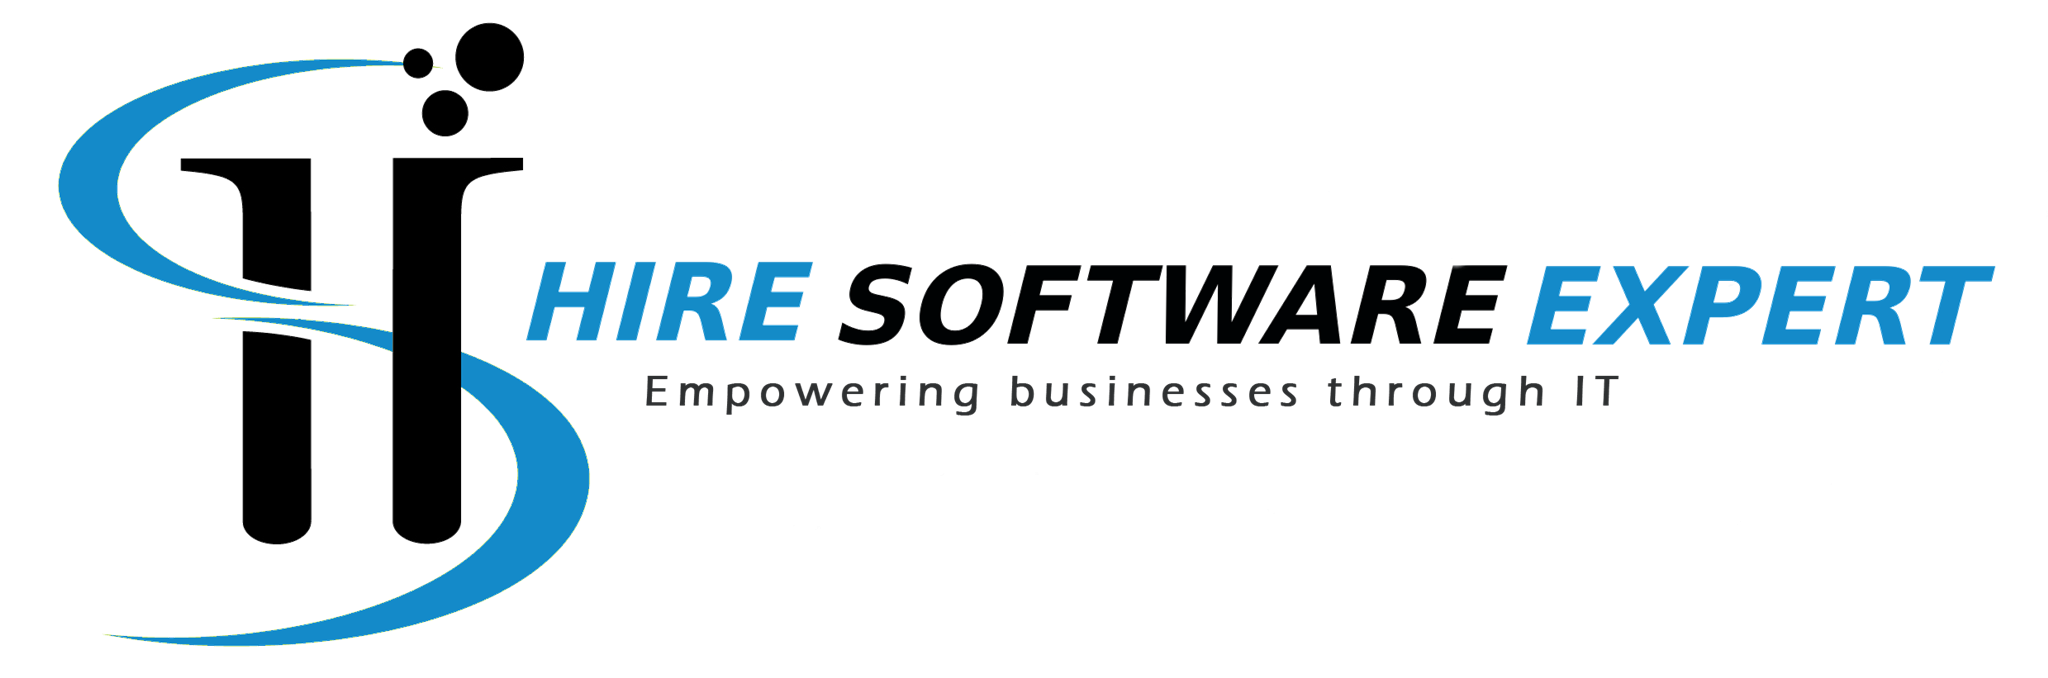 Hire Software Experts profile on Qualified.One